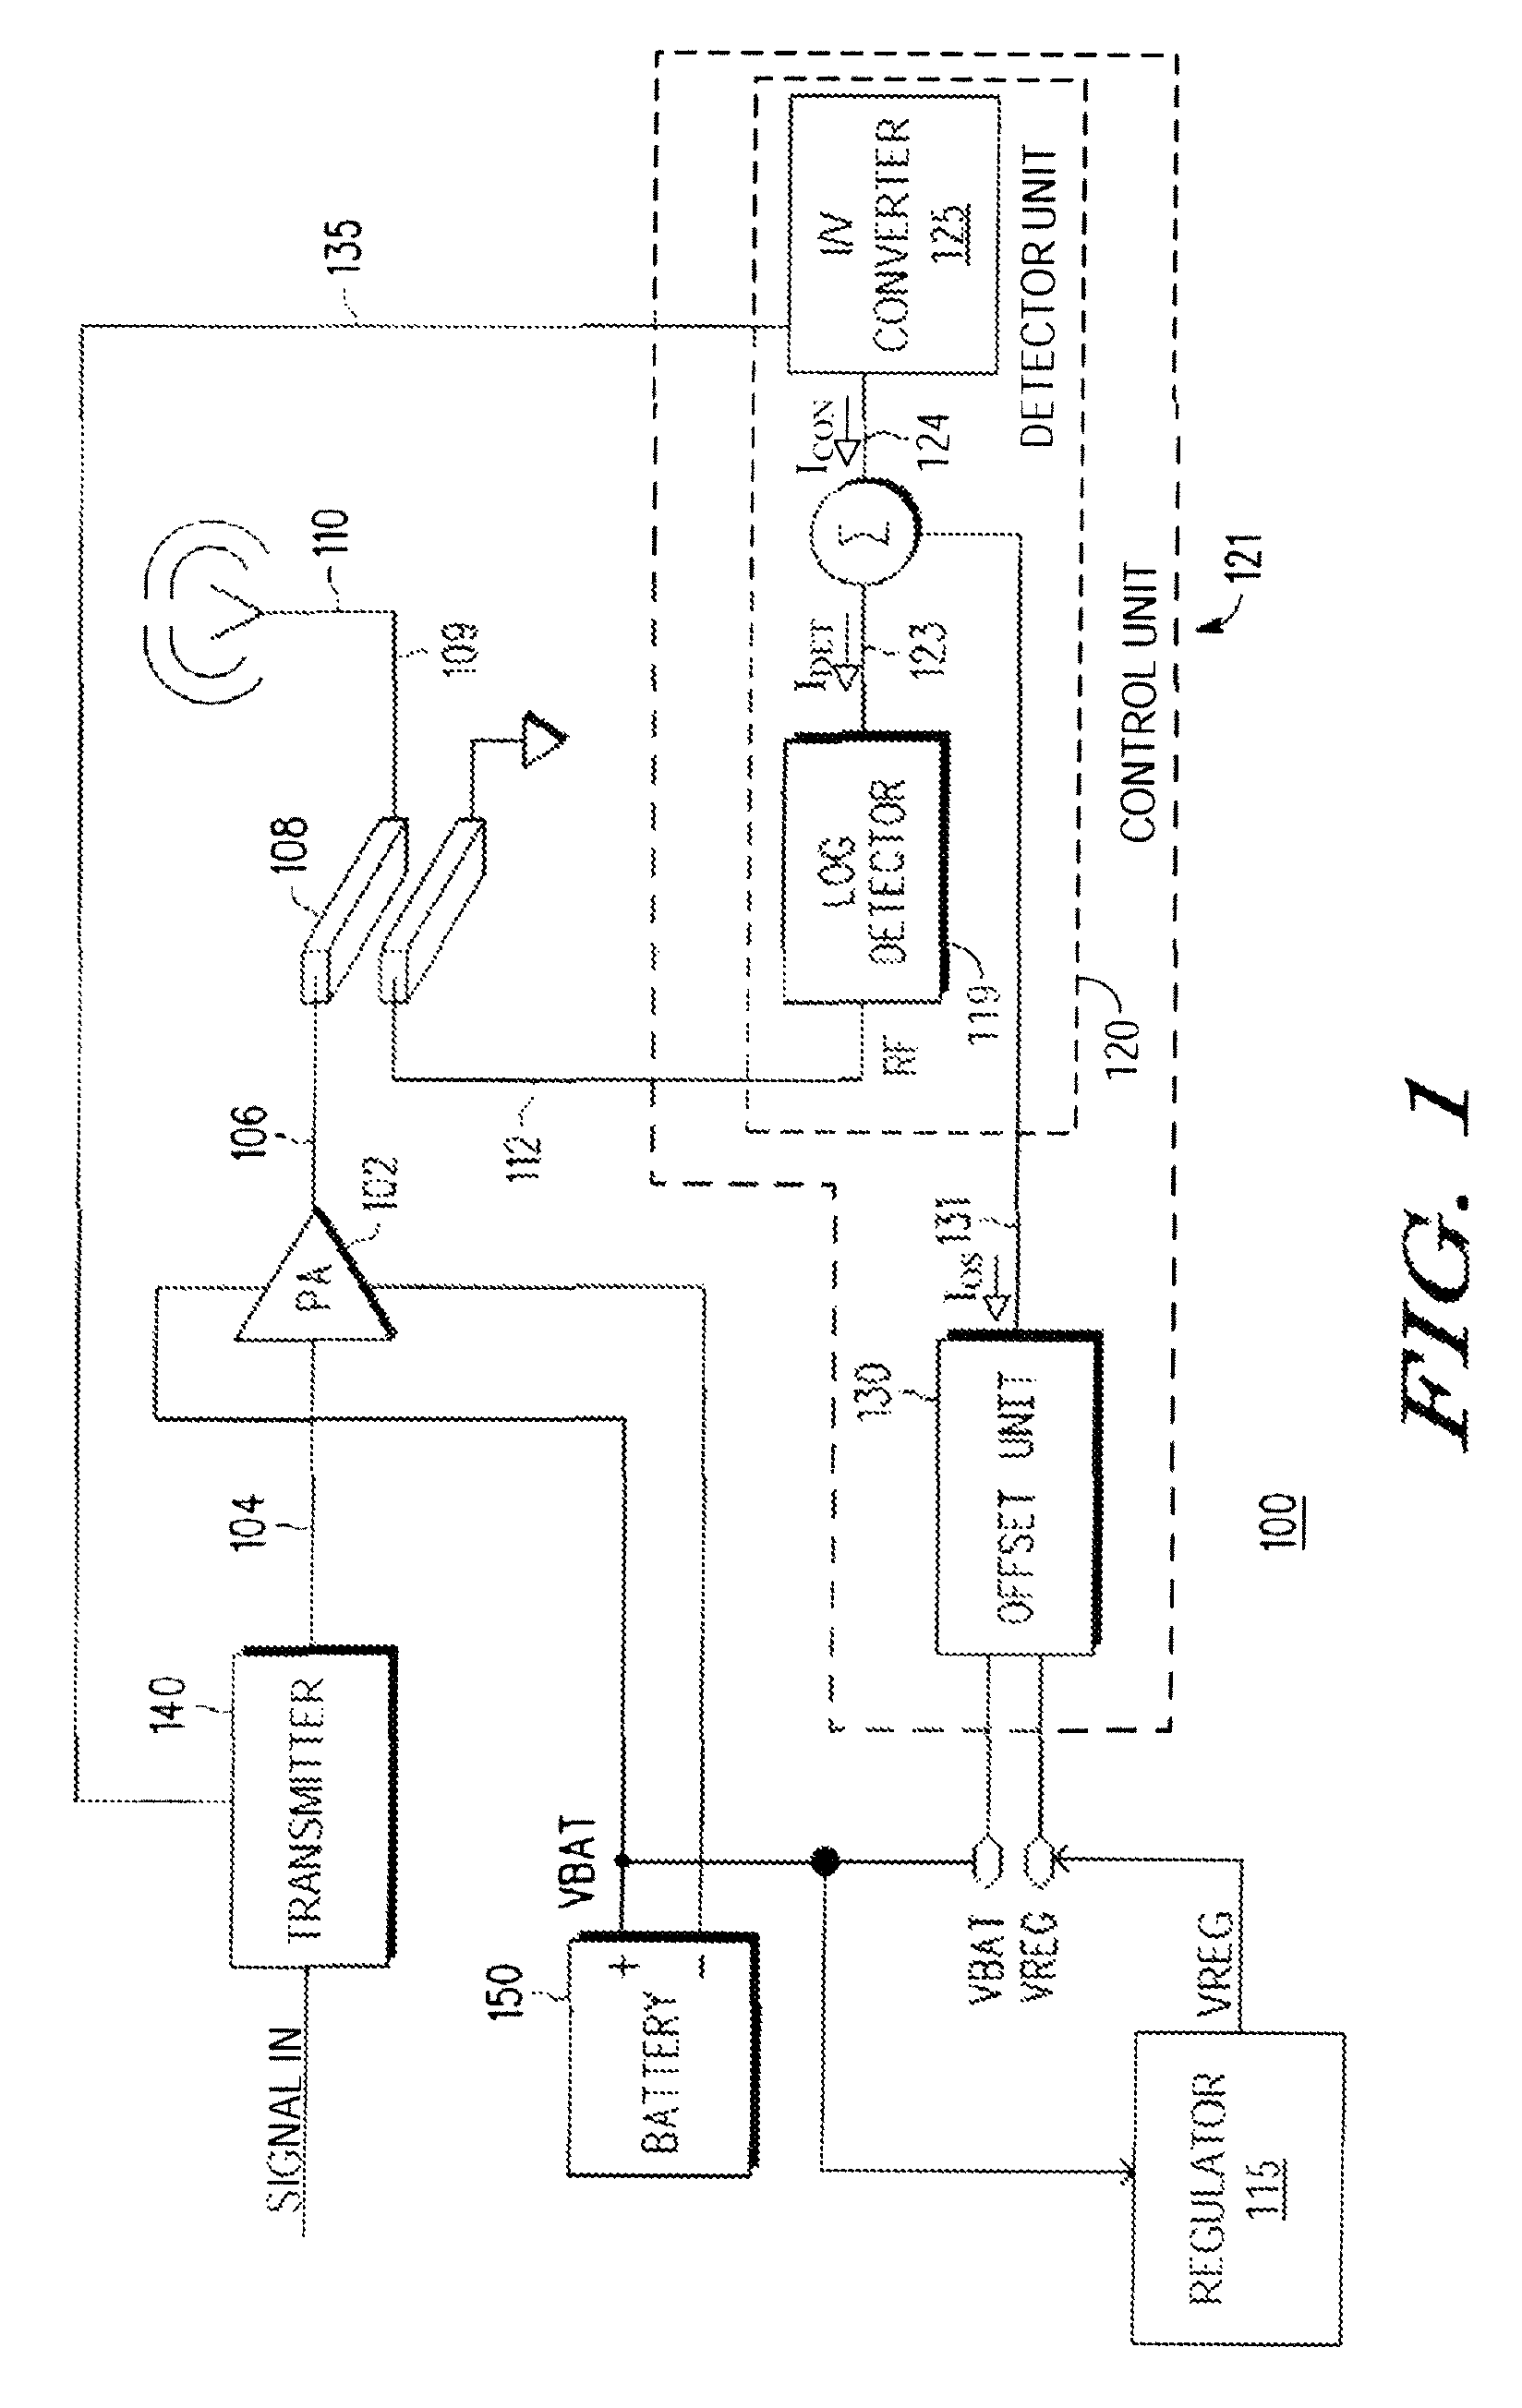 RF circuit with control unit to reduce signal power under appropriate conditions